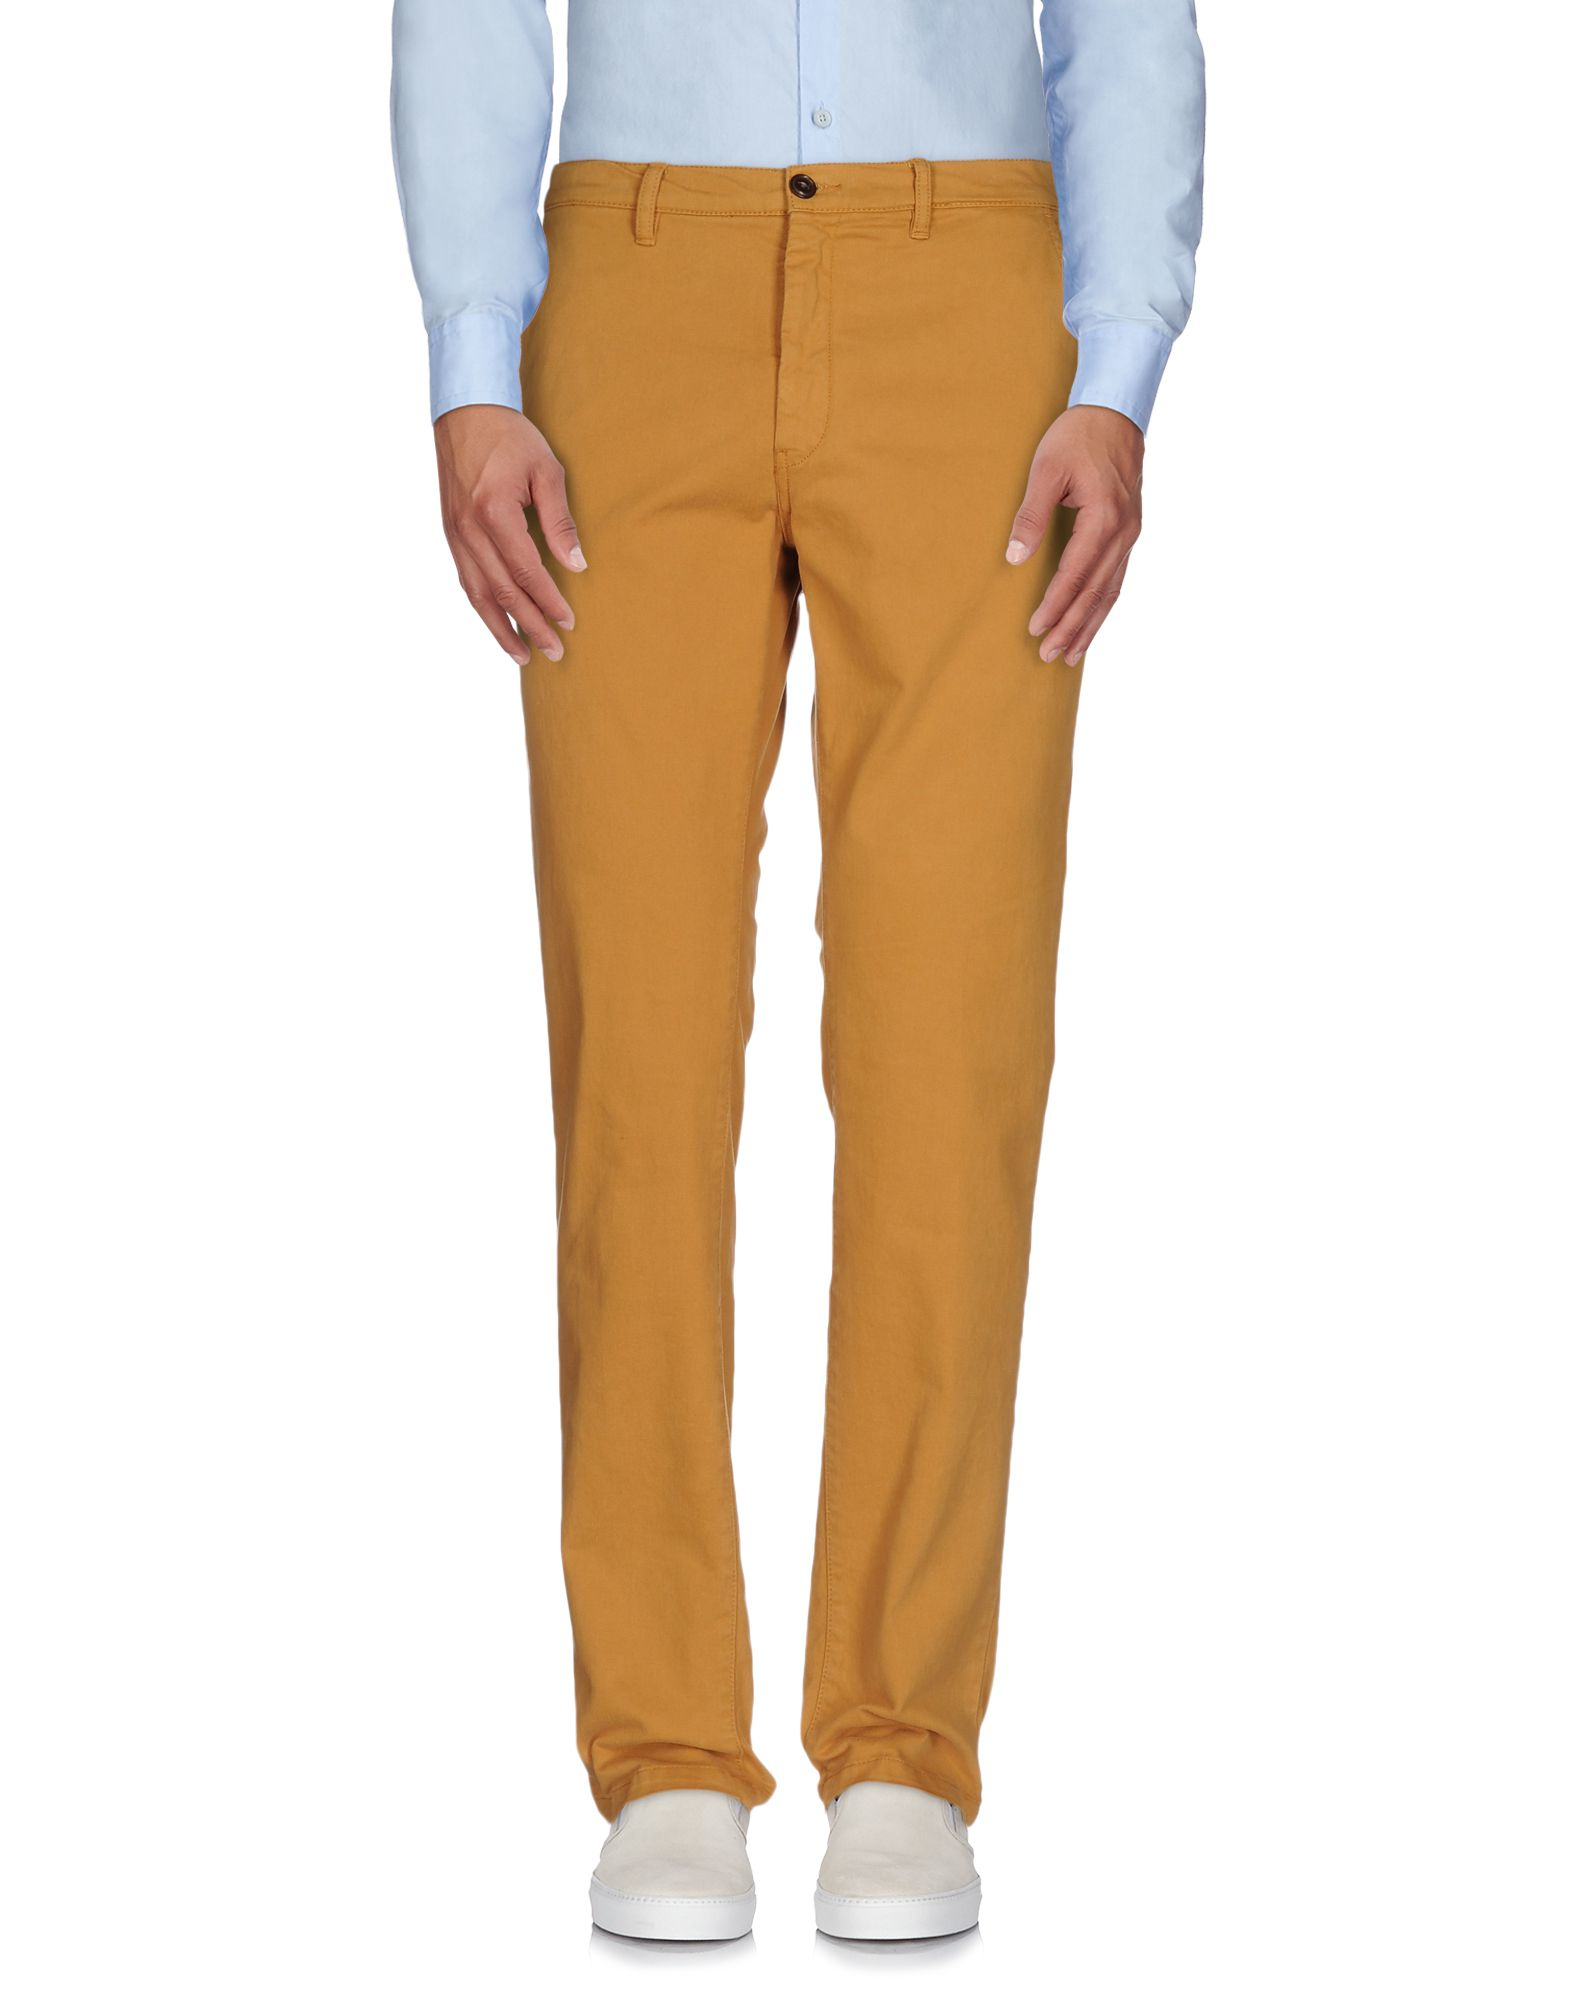 Lyst - Franklin & Marshall Casual Pants in Natural for Men